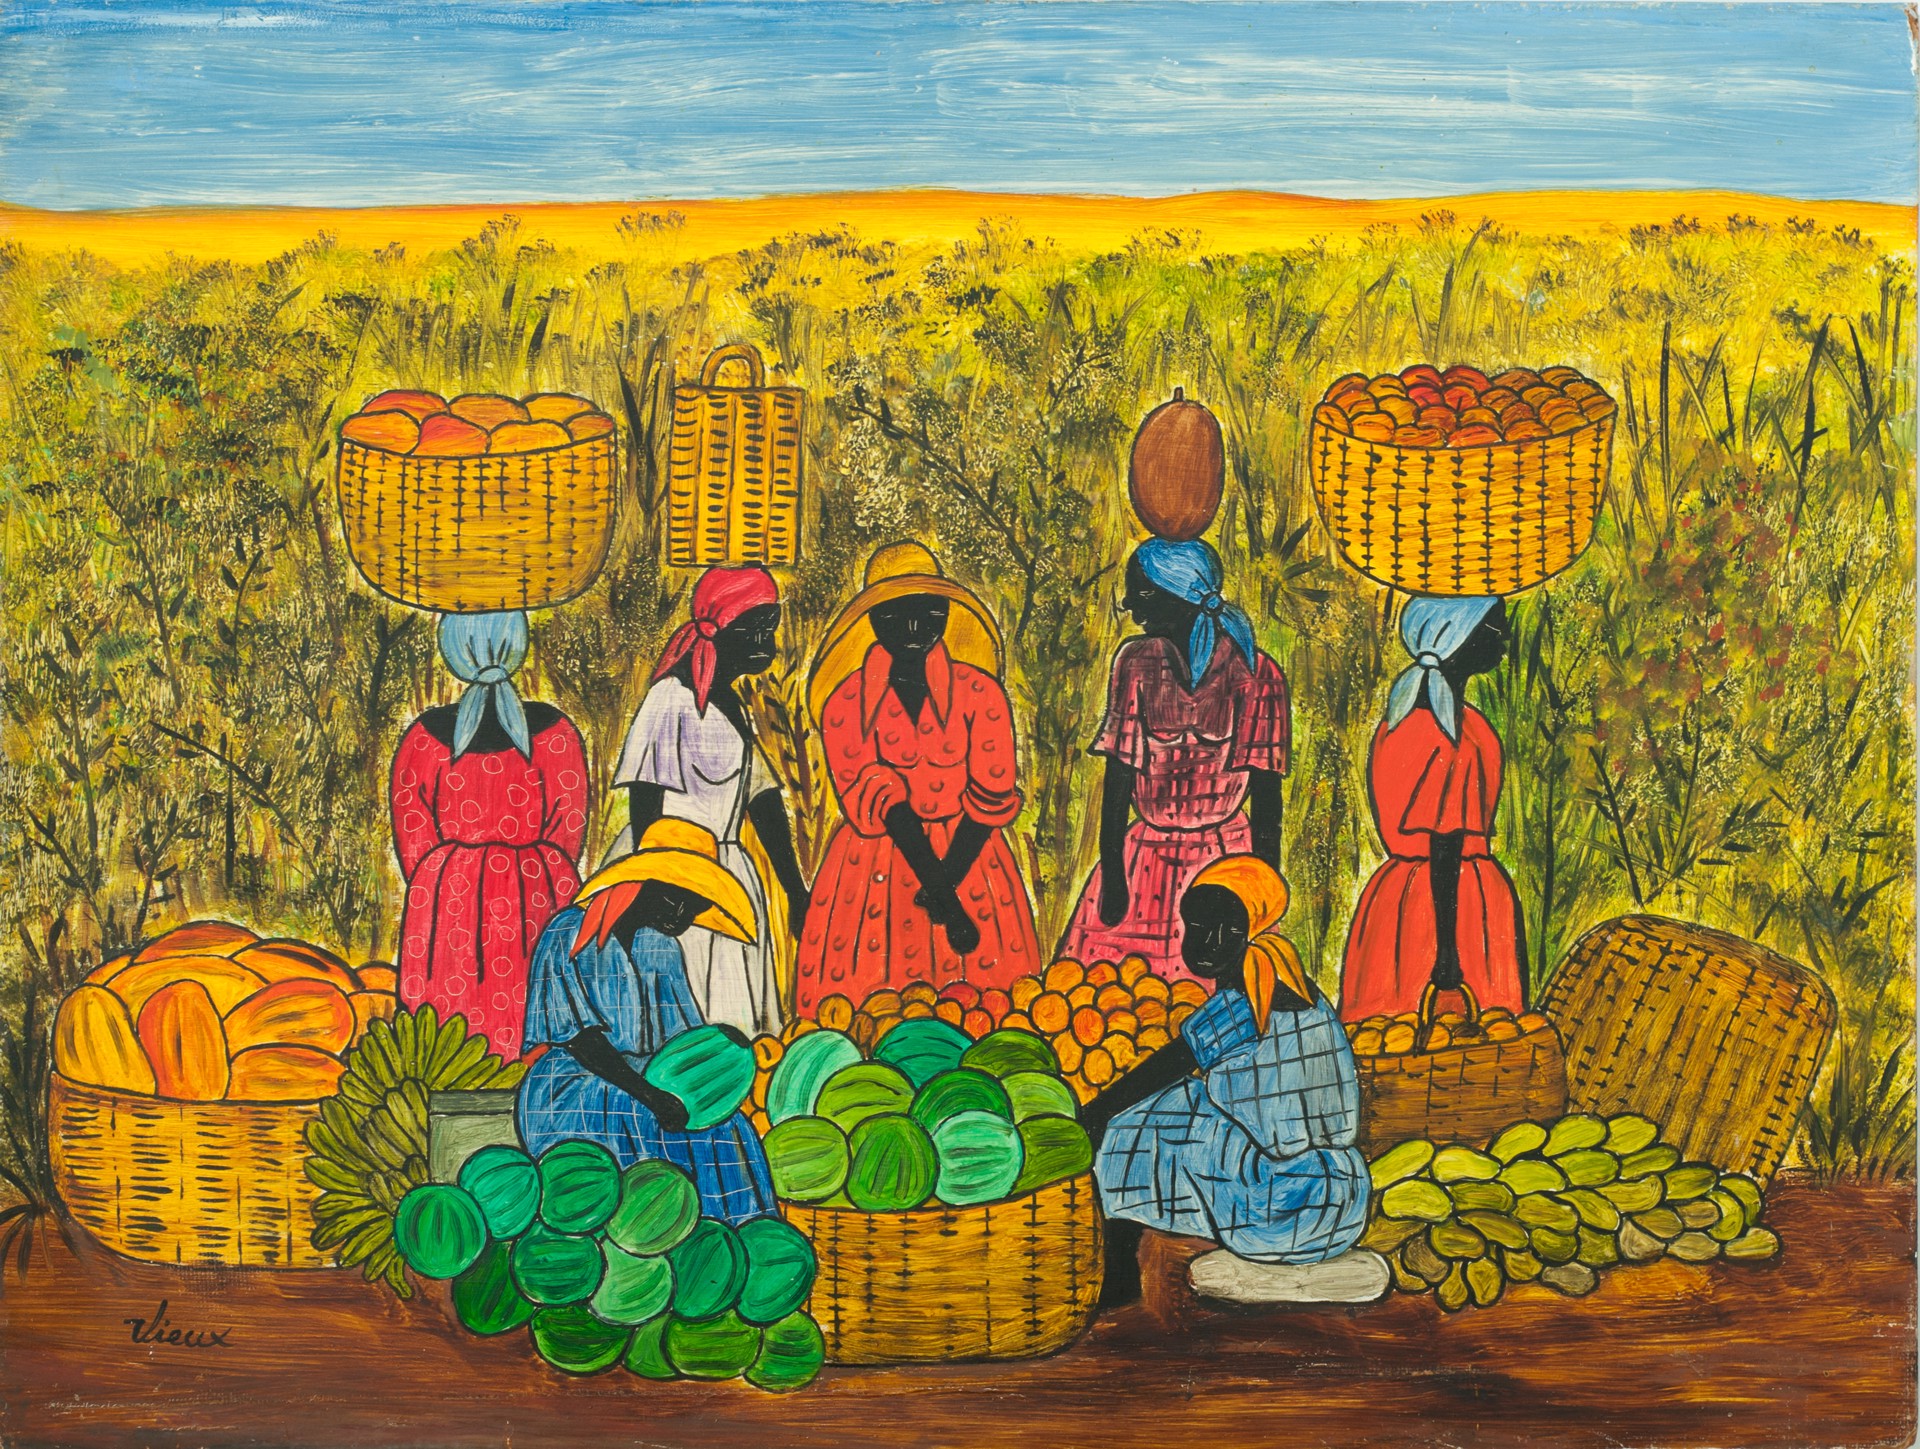 Sellers With Their Baskets #19-6-91GSN by Philippe Vieux (Haitian, b.1932)